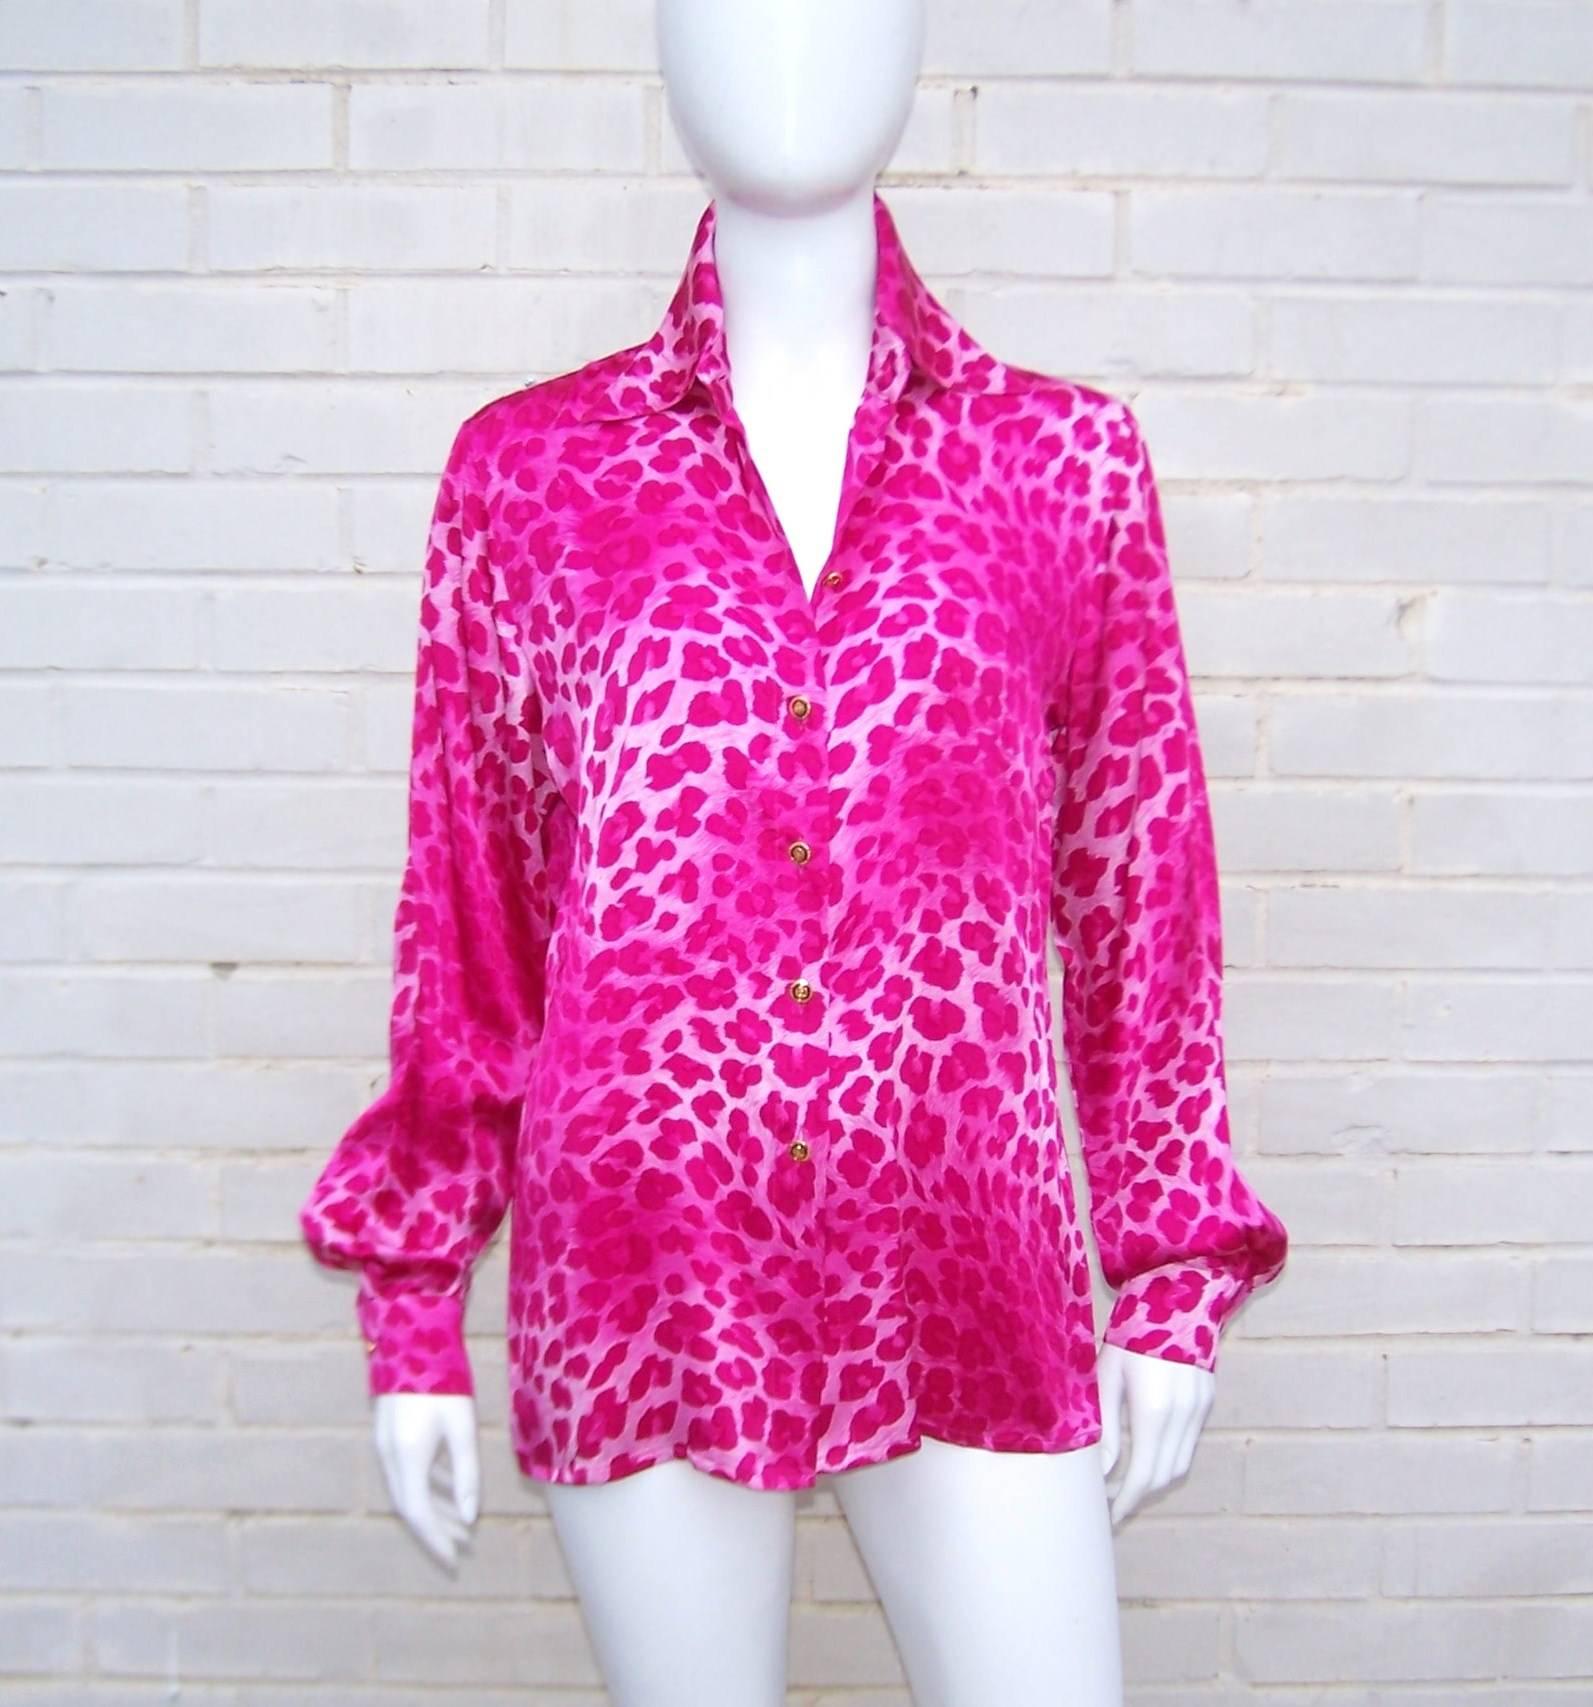 Escada goes wild!  This hot pink leopard animal print blouse gives a nod to menswear styles including a coordinating pocket square.  The attention to detail is evident in the luxurious silk charmeuse fabric and jewelry style enamel logo buttons. 